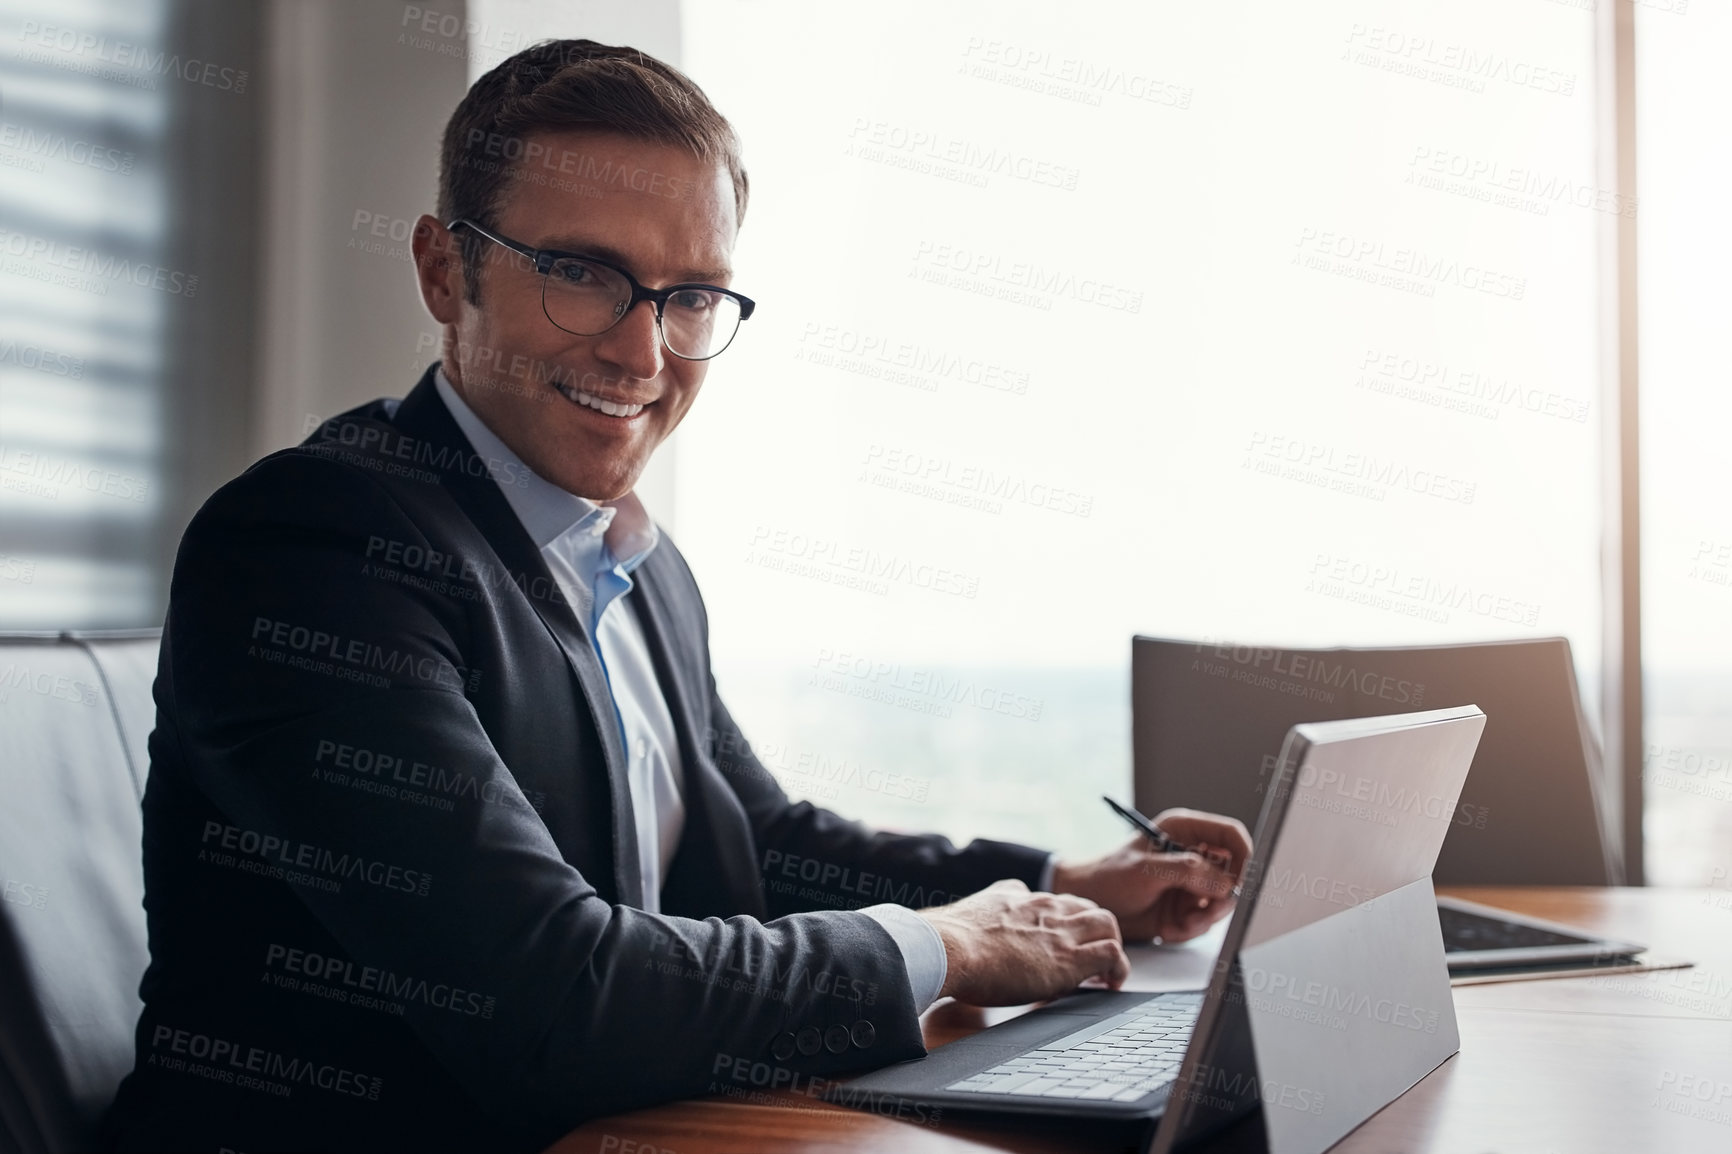 Buy stock photo Cropped portrait of a handsome businessman working in his corporate office